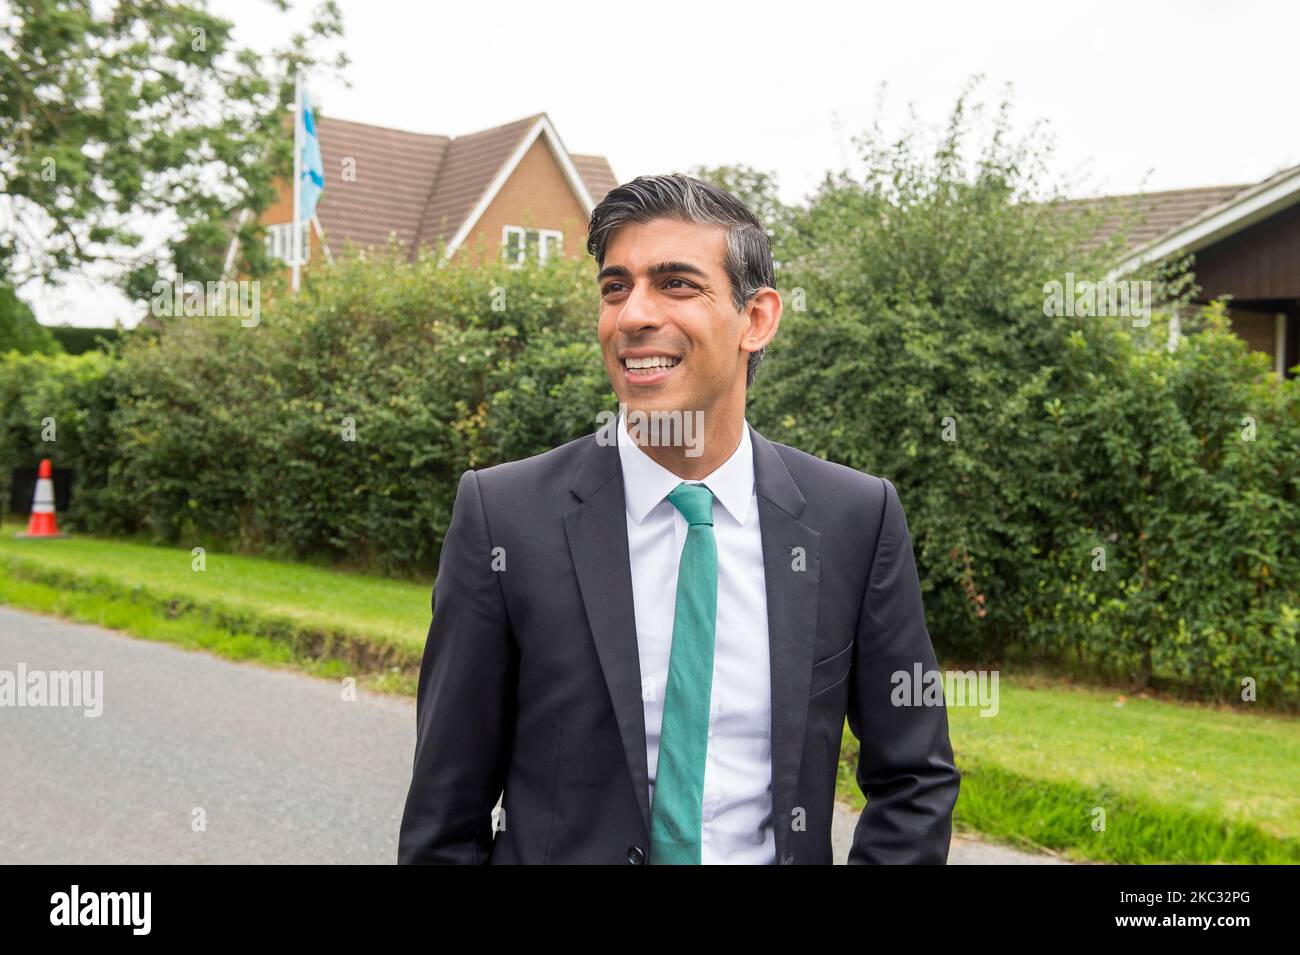 3 September 2021: Visit by Rishi Sunak to the village of Picton in North Yorkshire to see the rollout of fibre broadband by Hessle based company Quick Stock Photo